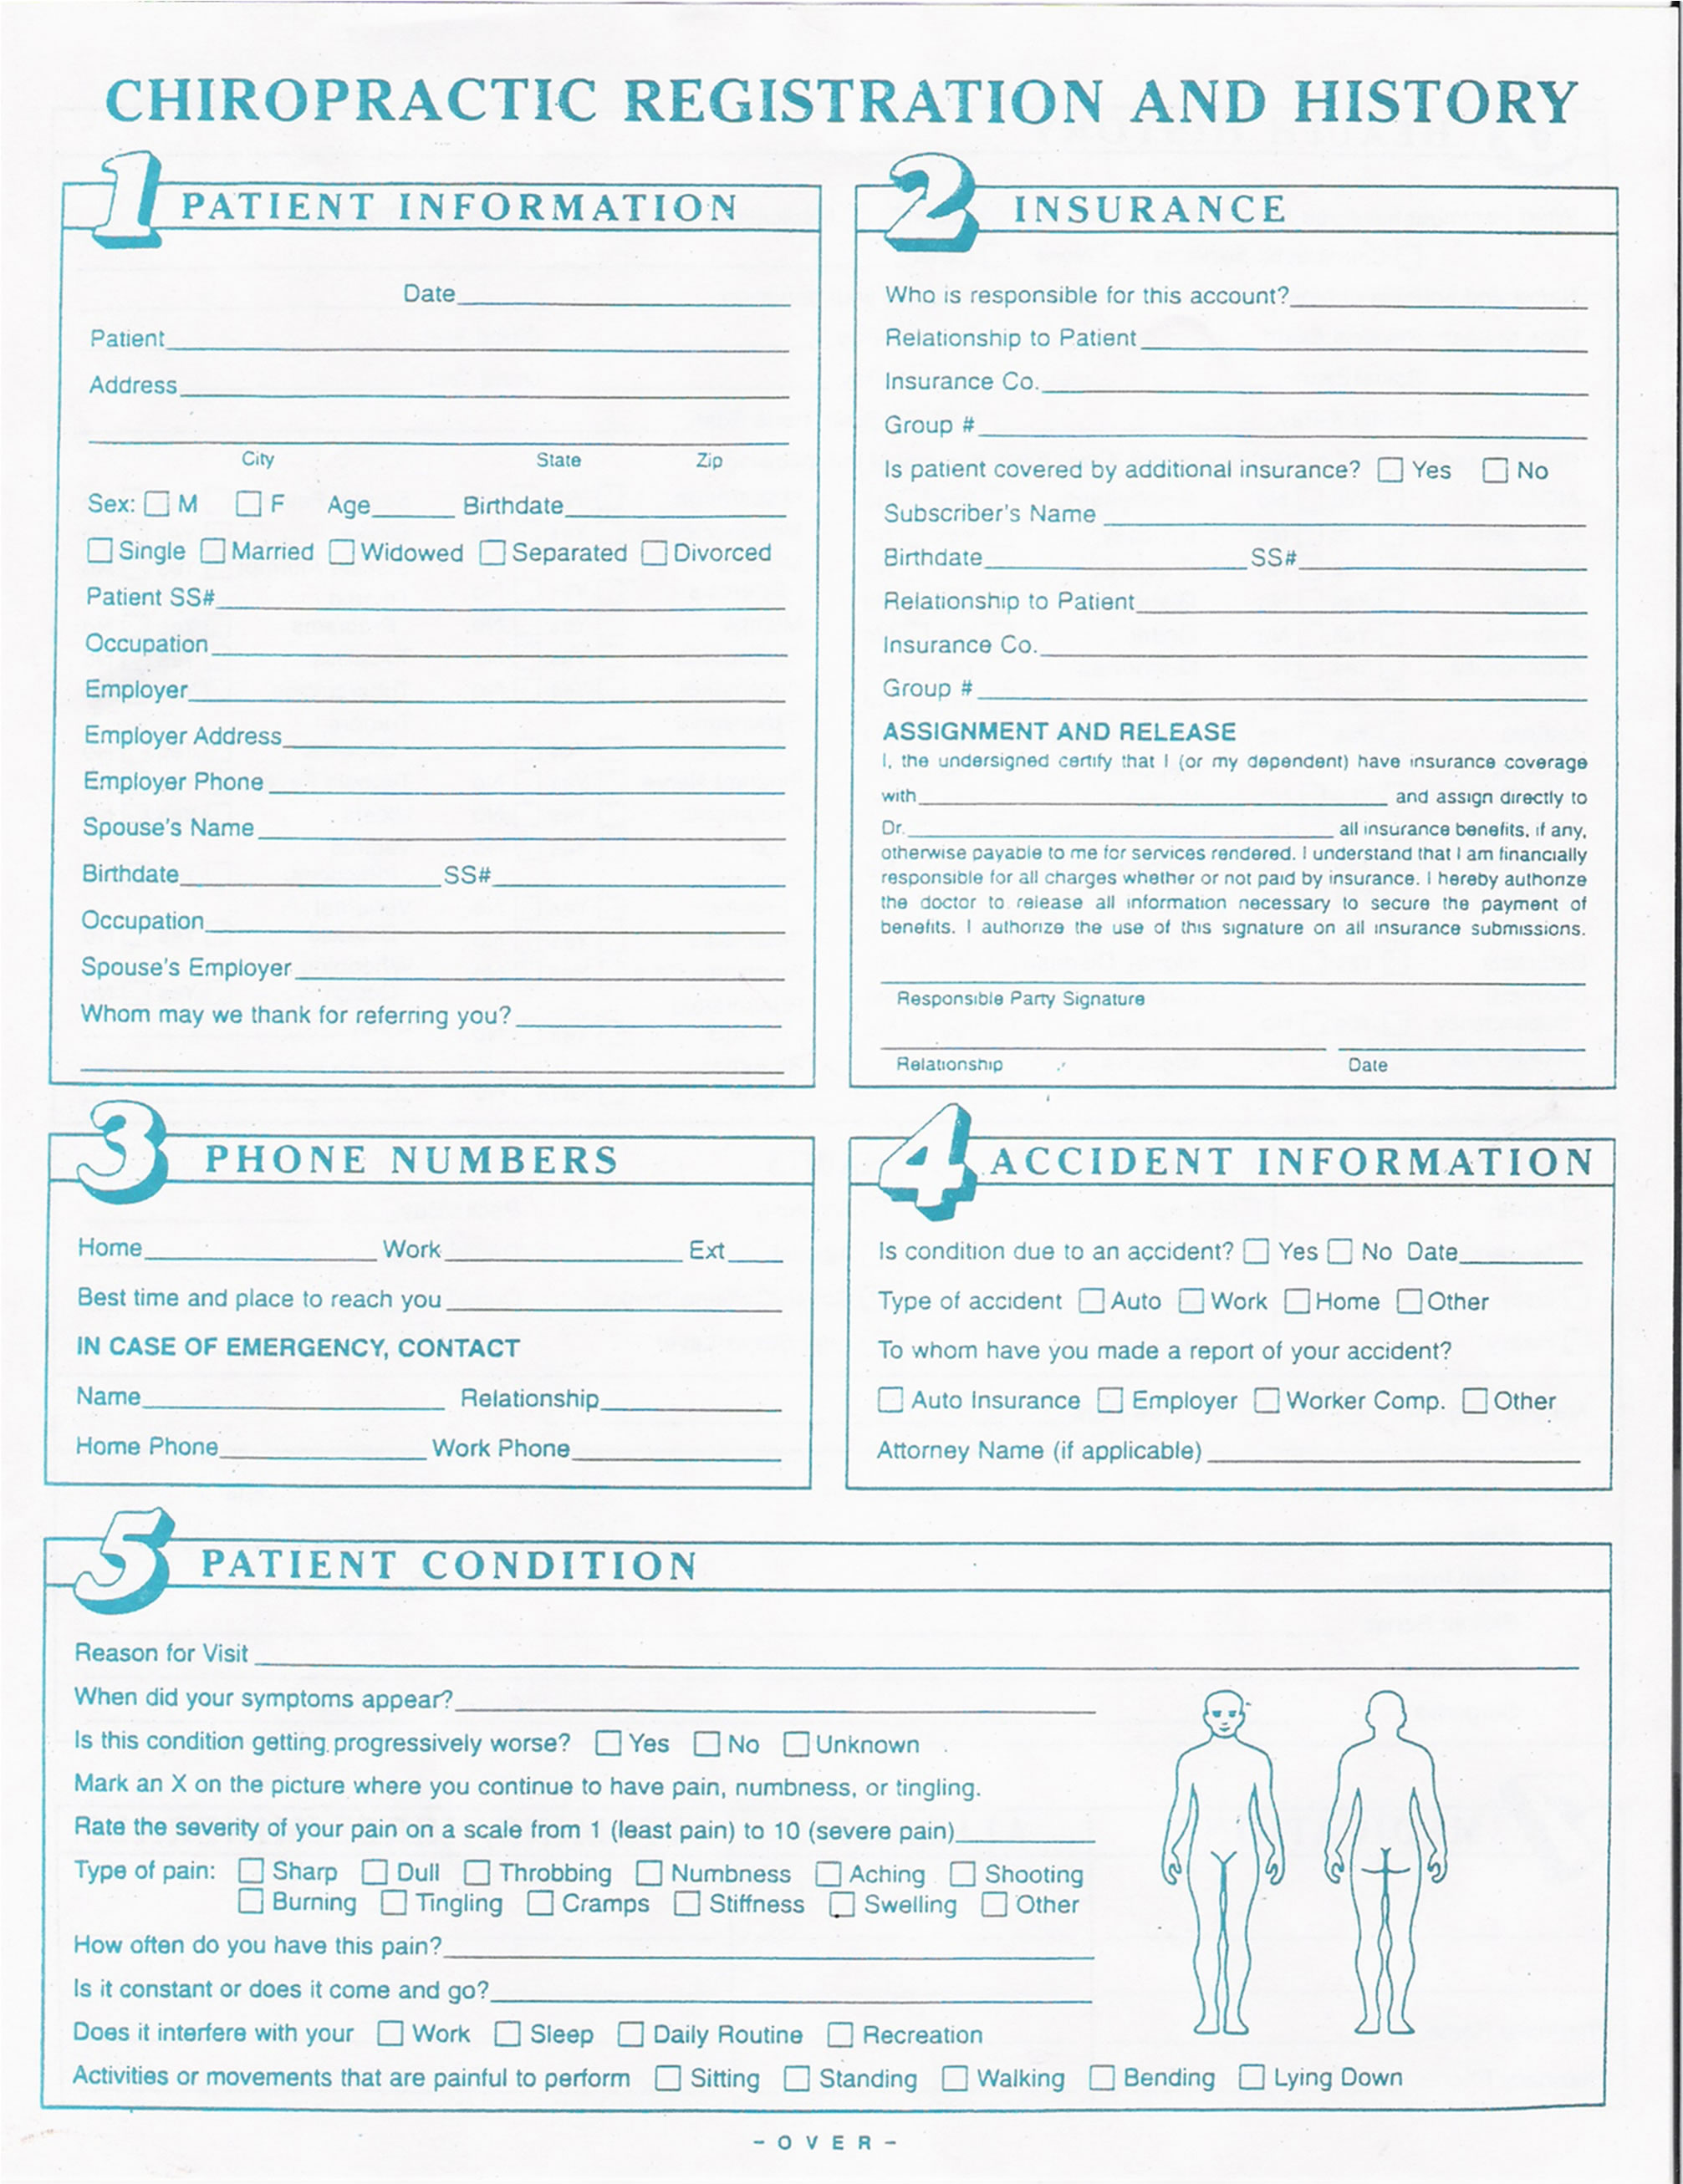 christensen-chiropractic-new-patient-intake-form-fill-and-sign